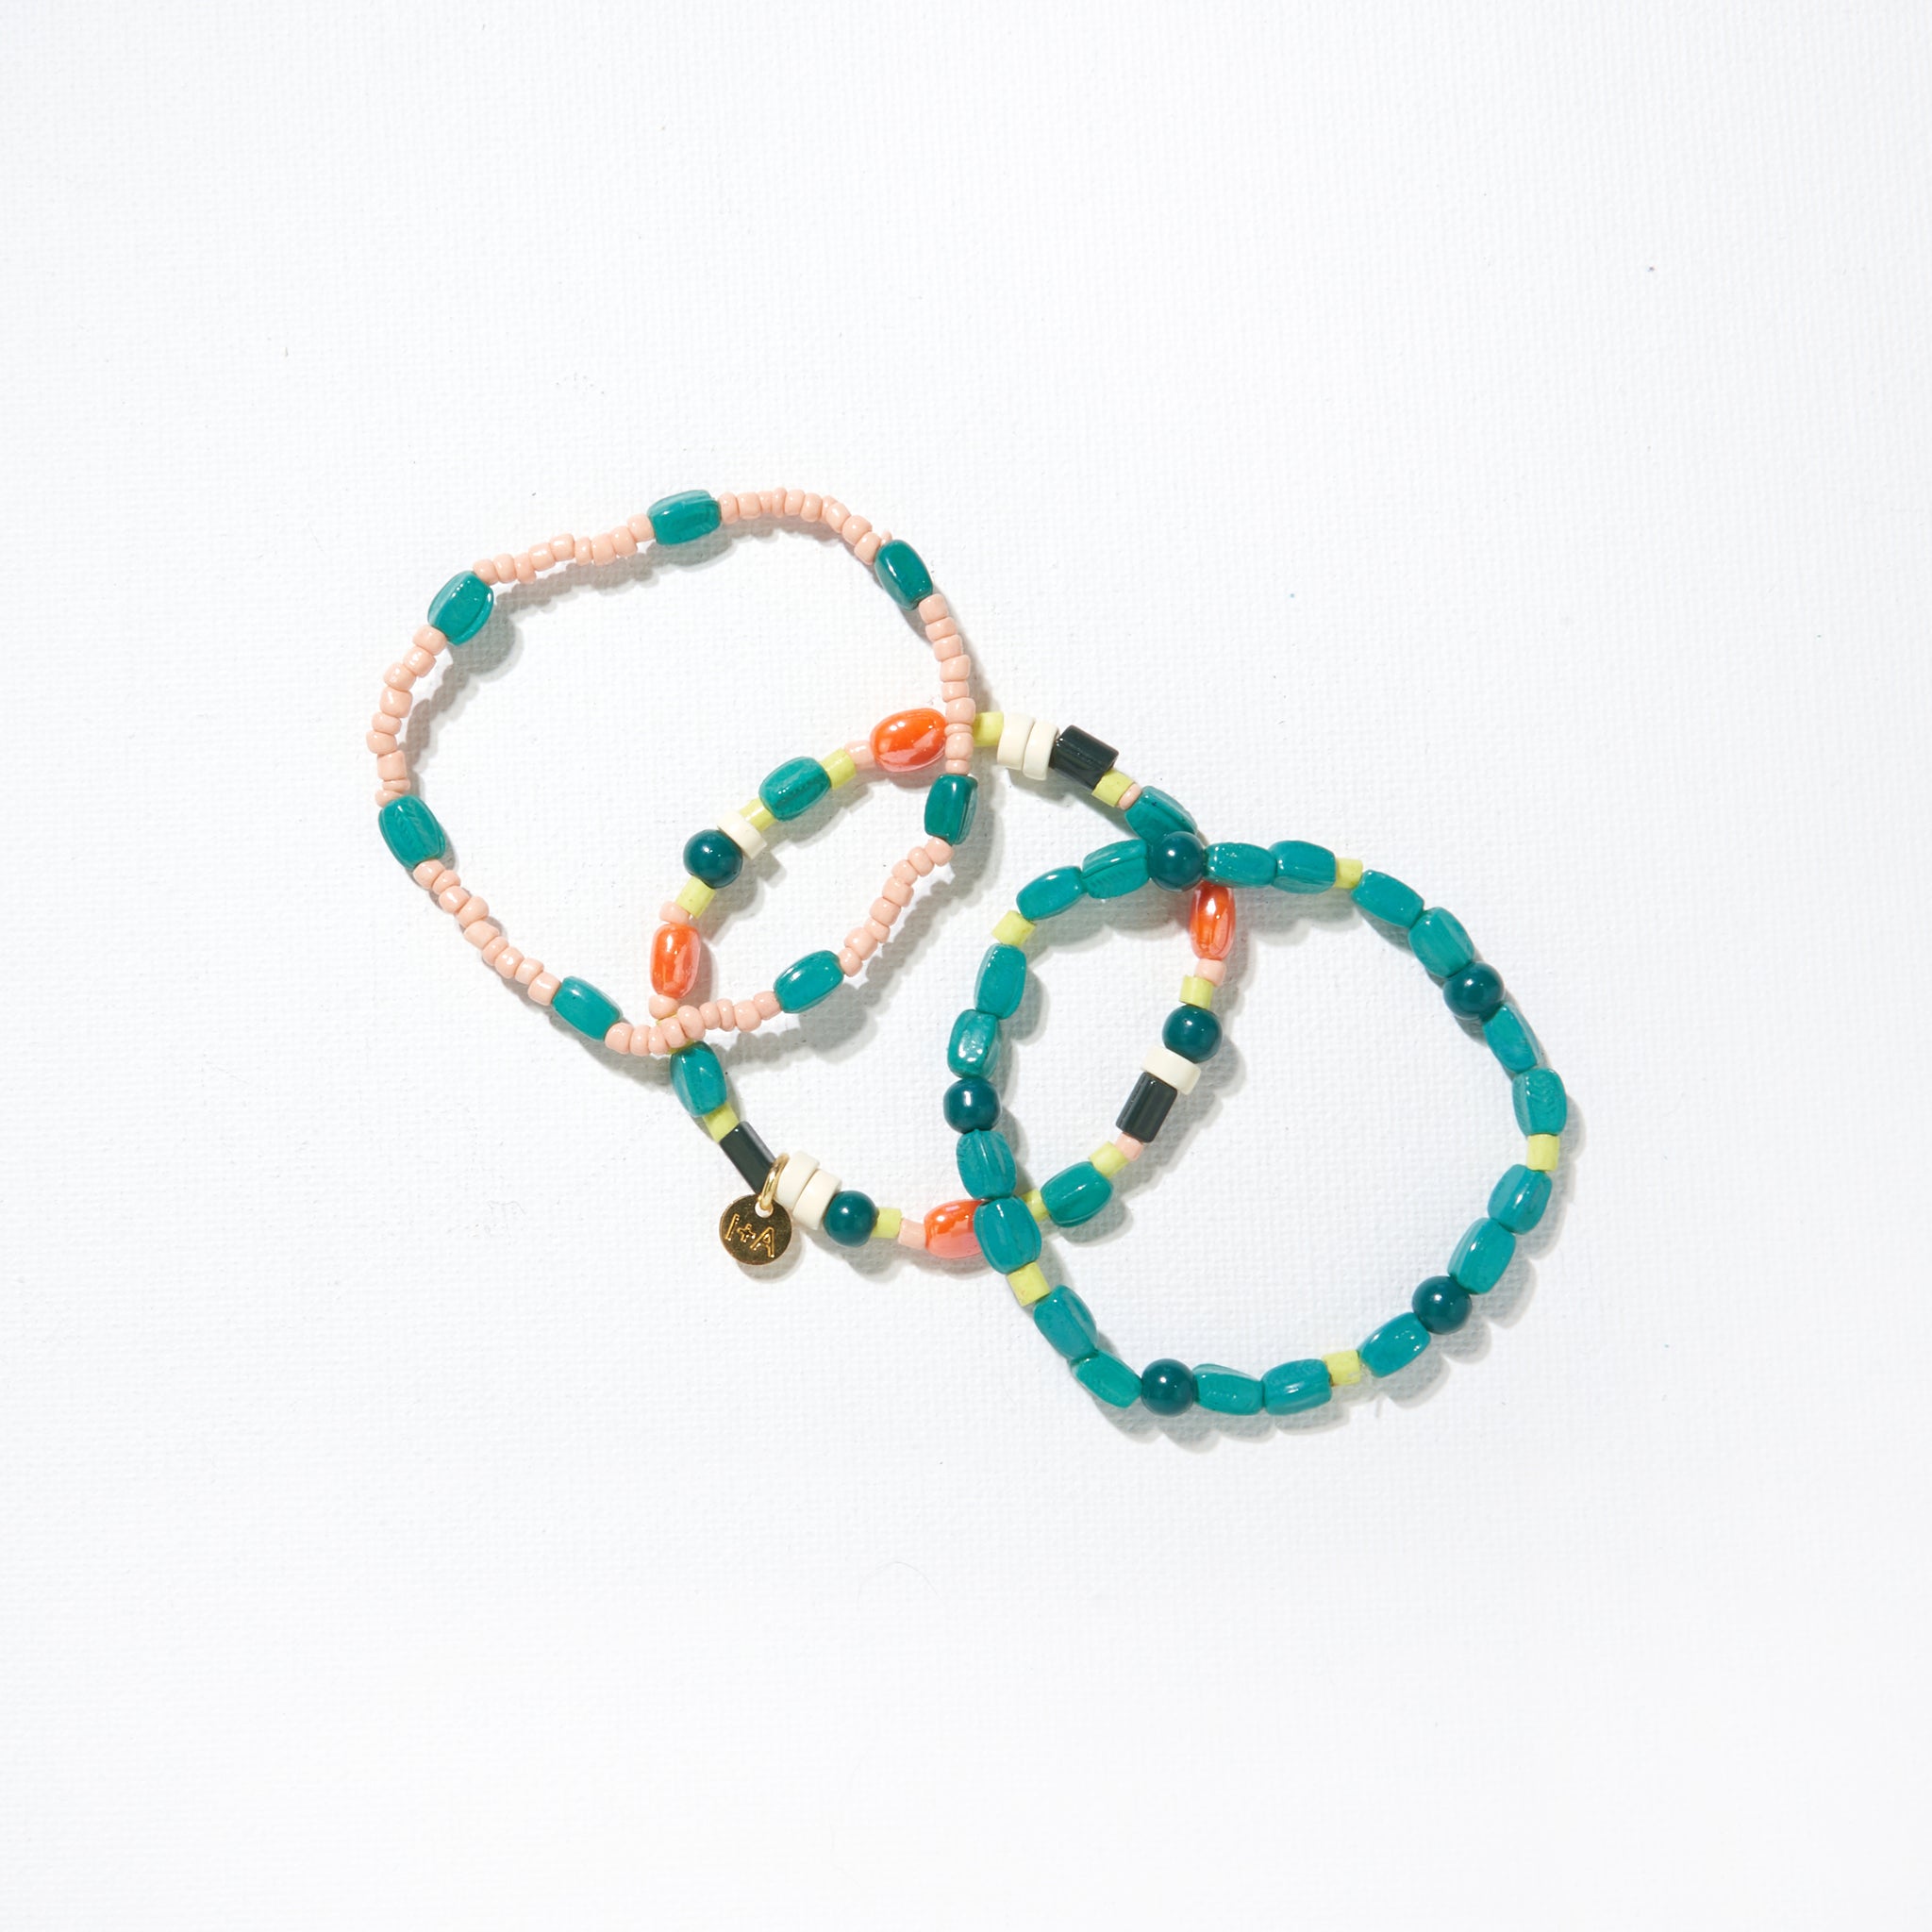 Ink + Alloy Mix Trio of Beaded Stretch Bracelets - Peacock Mix